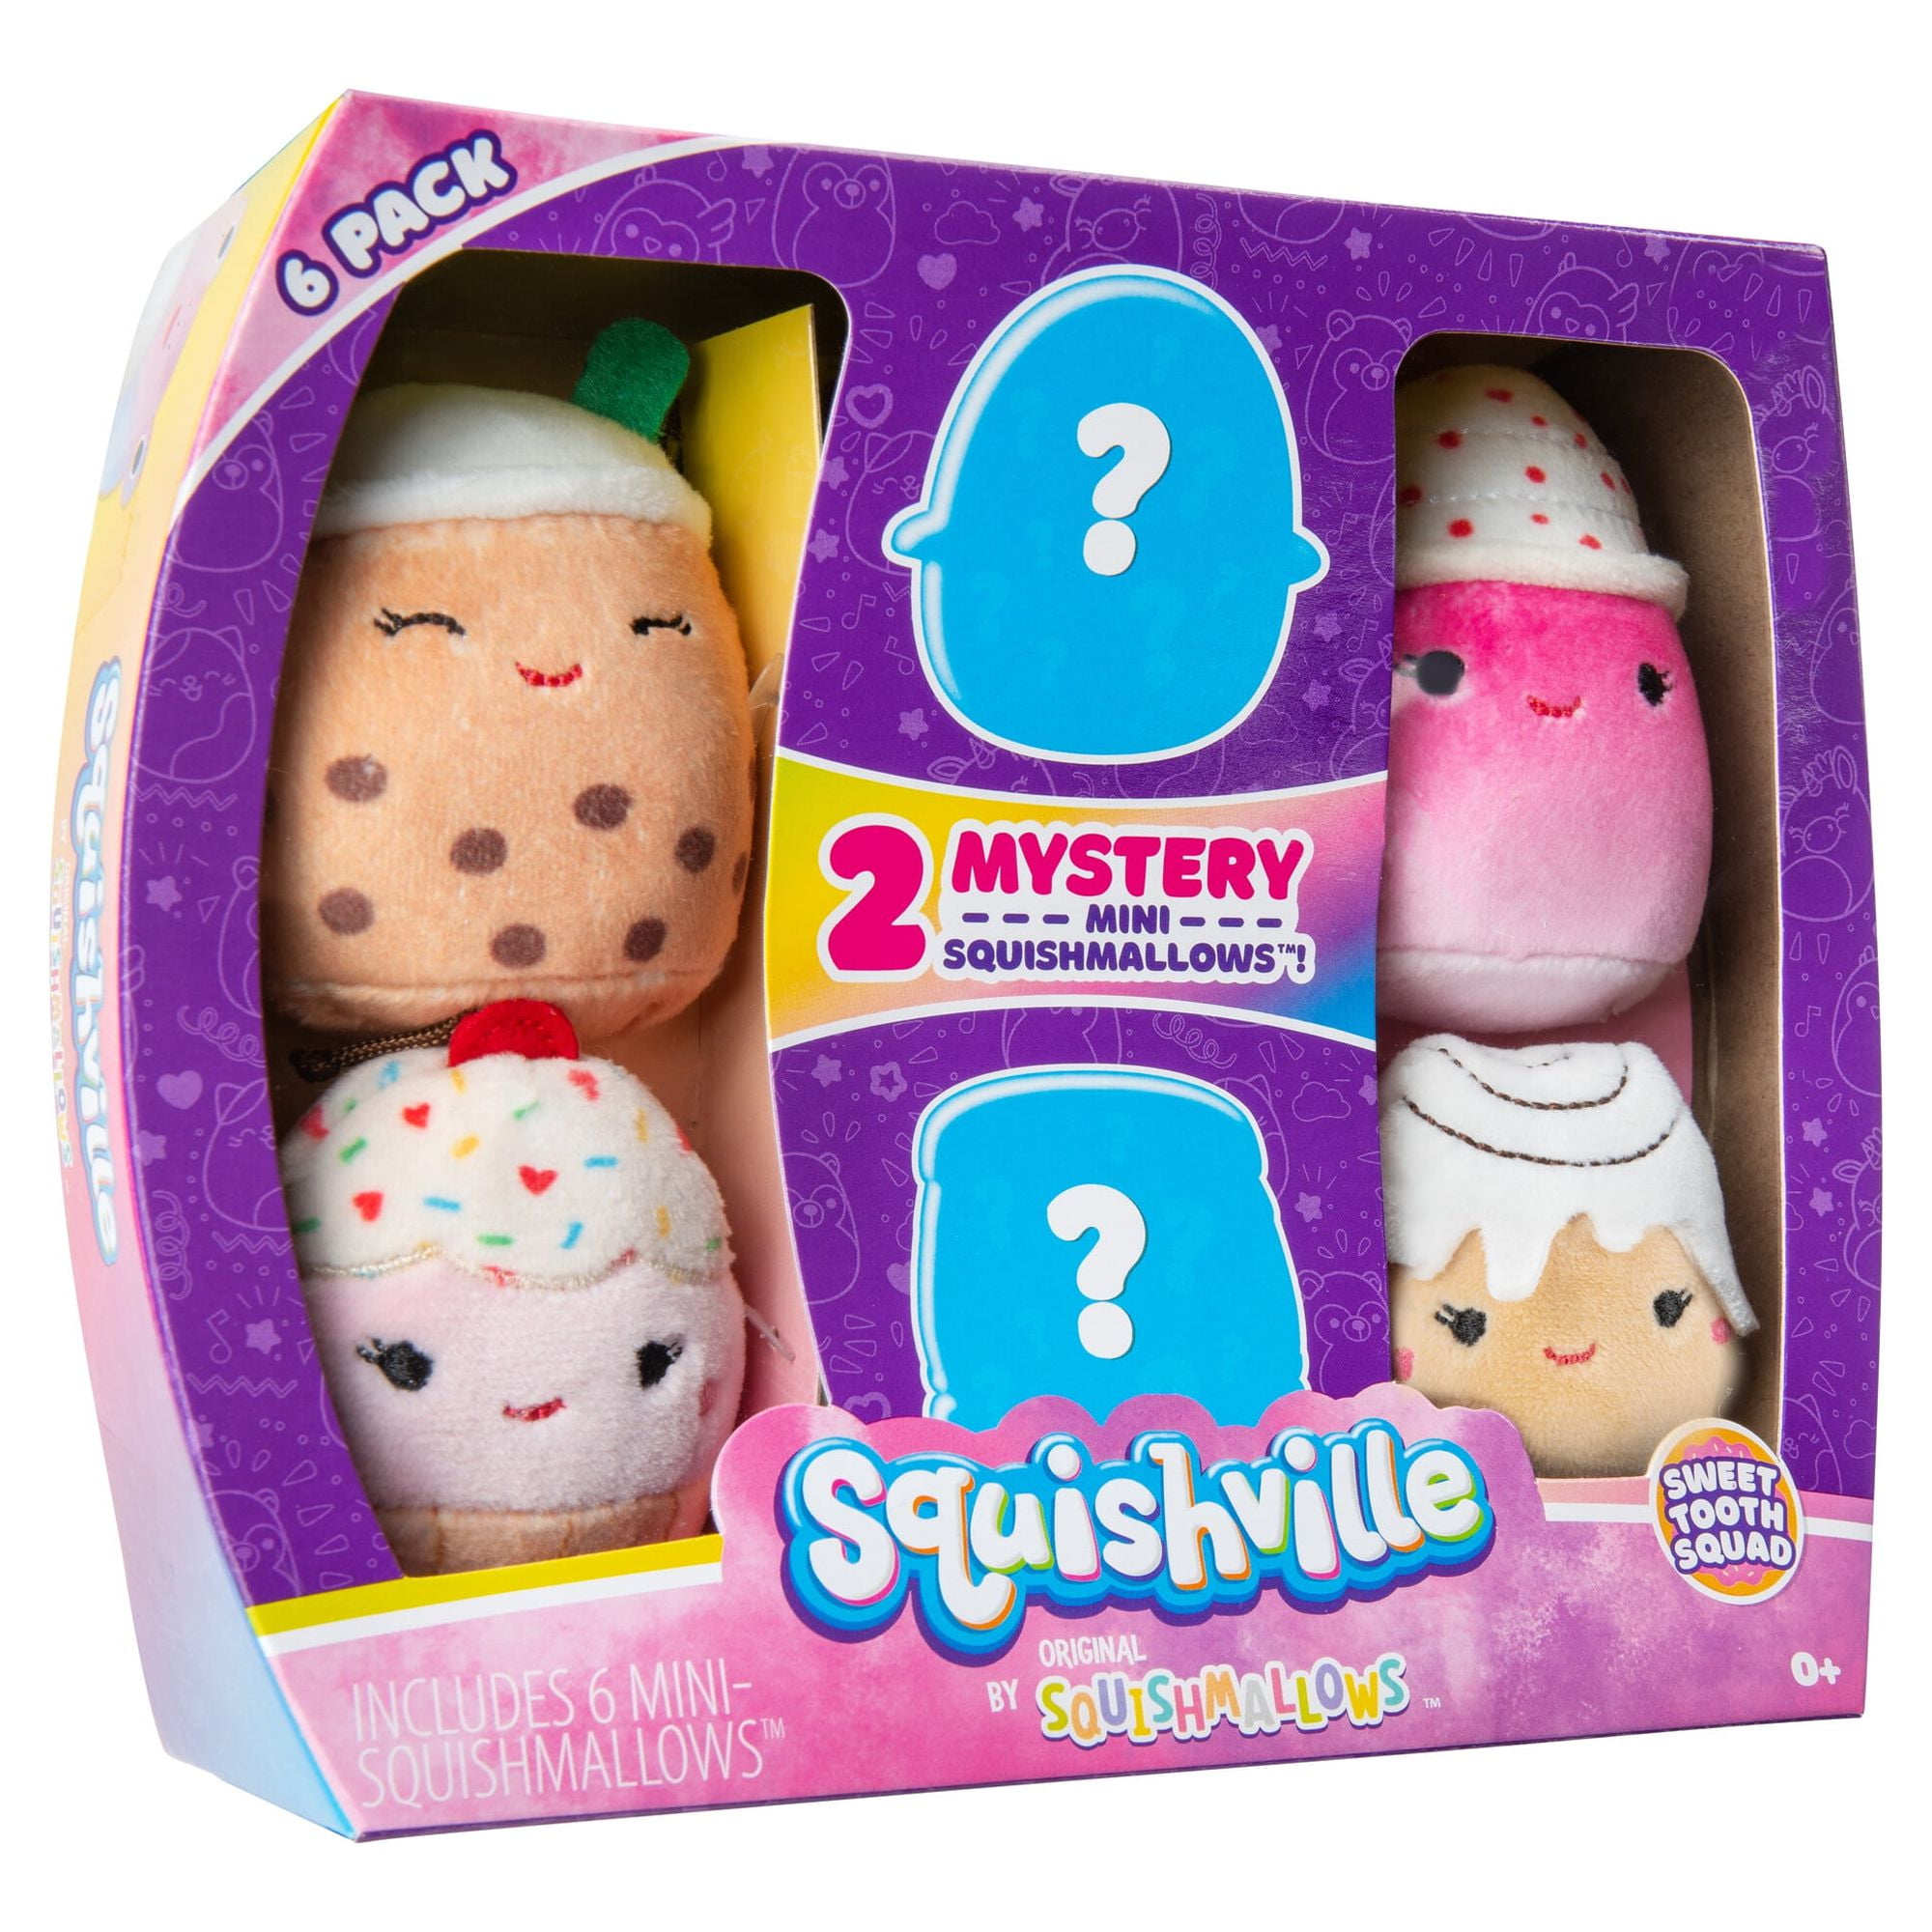 Squishville by Original Squishmallows Sweet Tooth Squad 2-inch Collectable  Plush Toys for Kids Ages 3 and up